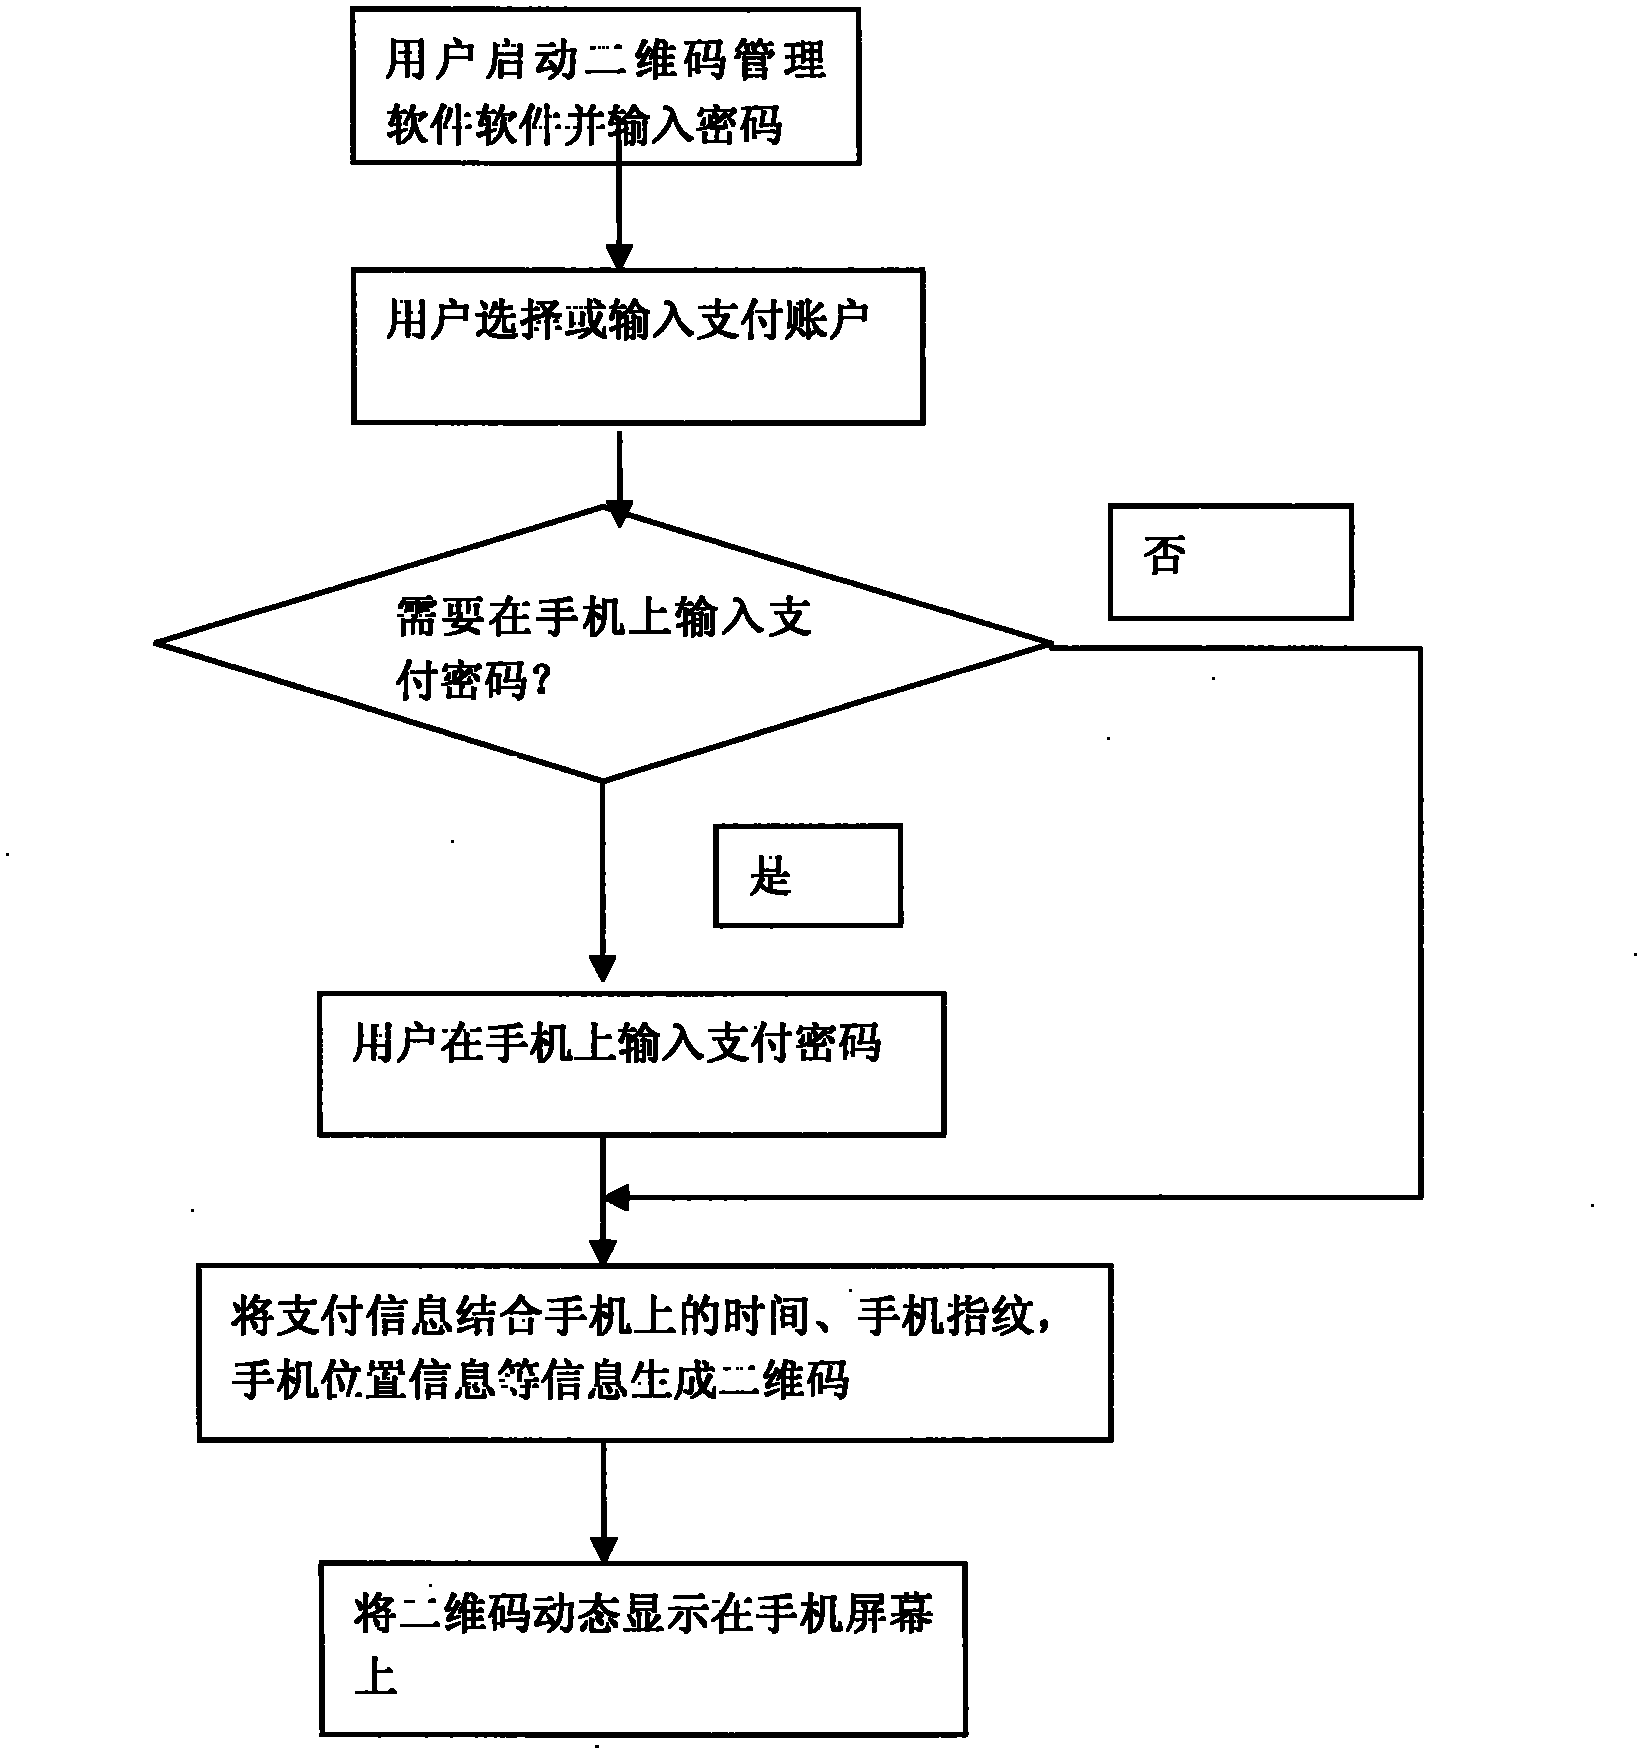 Method for generating two-dimensional code and implementing mobile payment by mobile phone